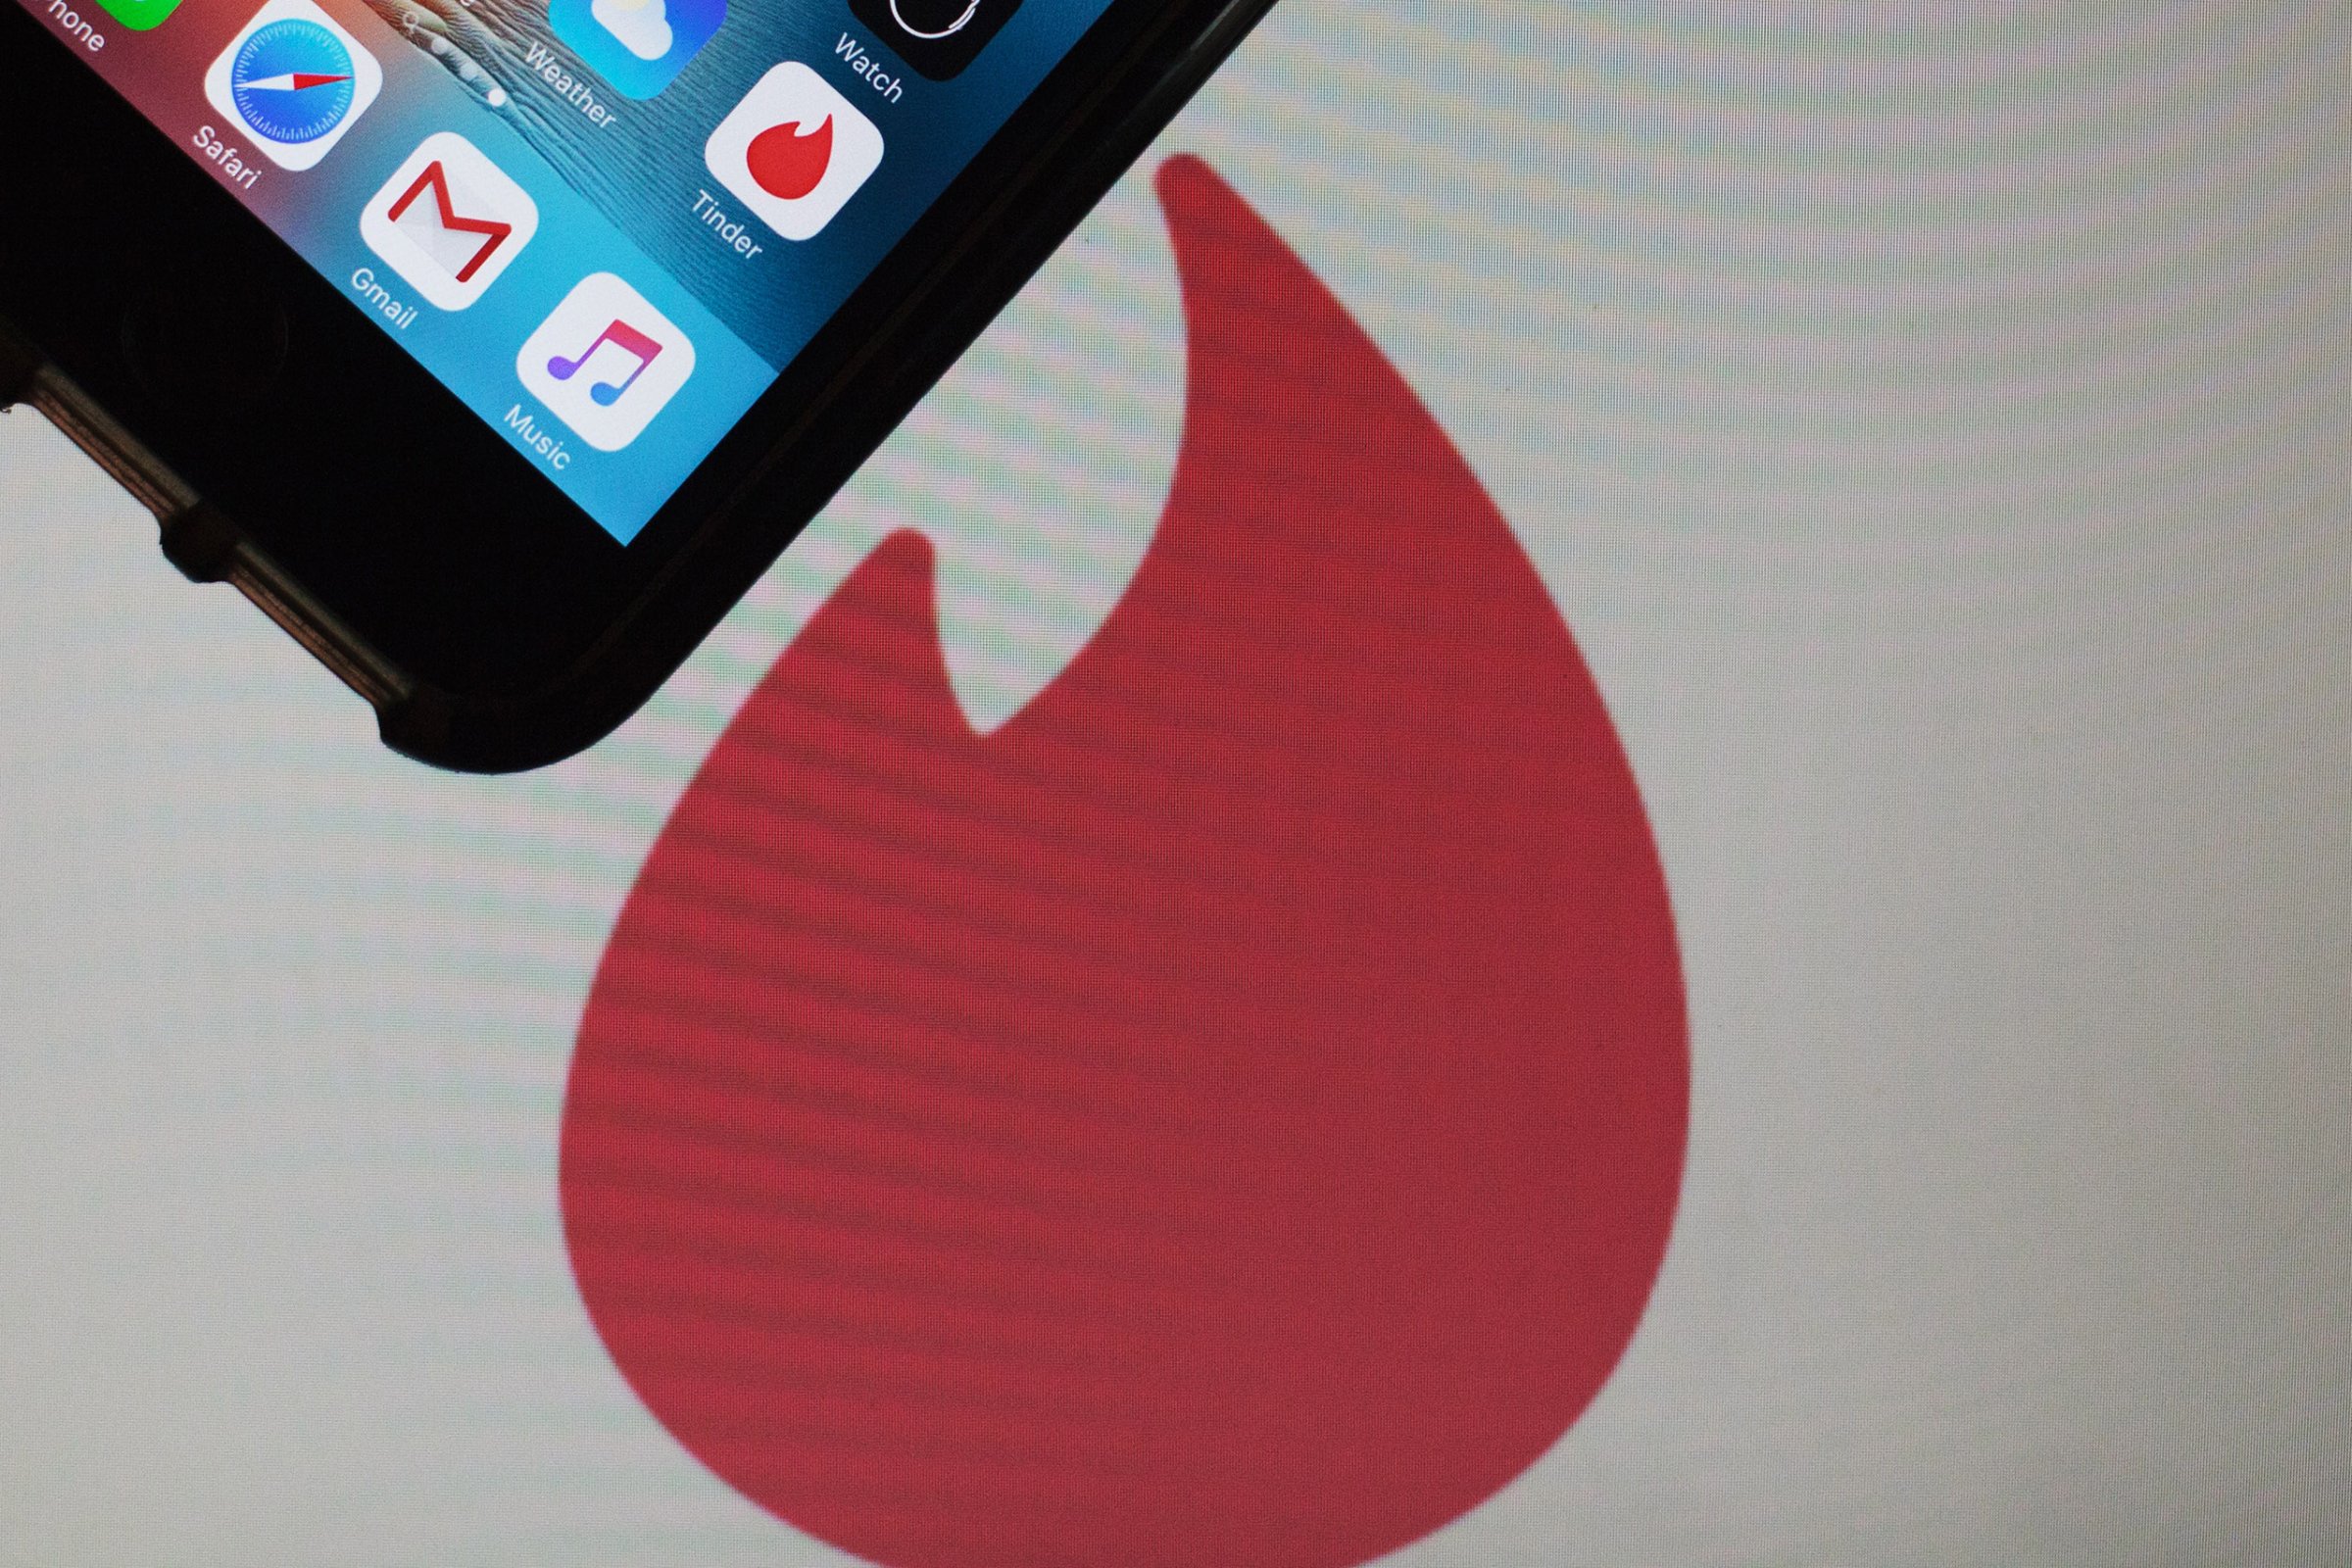 The Tinder Inc. application icon is displayed on a smartphone in New Delhi, India, on July 29, 2016.